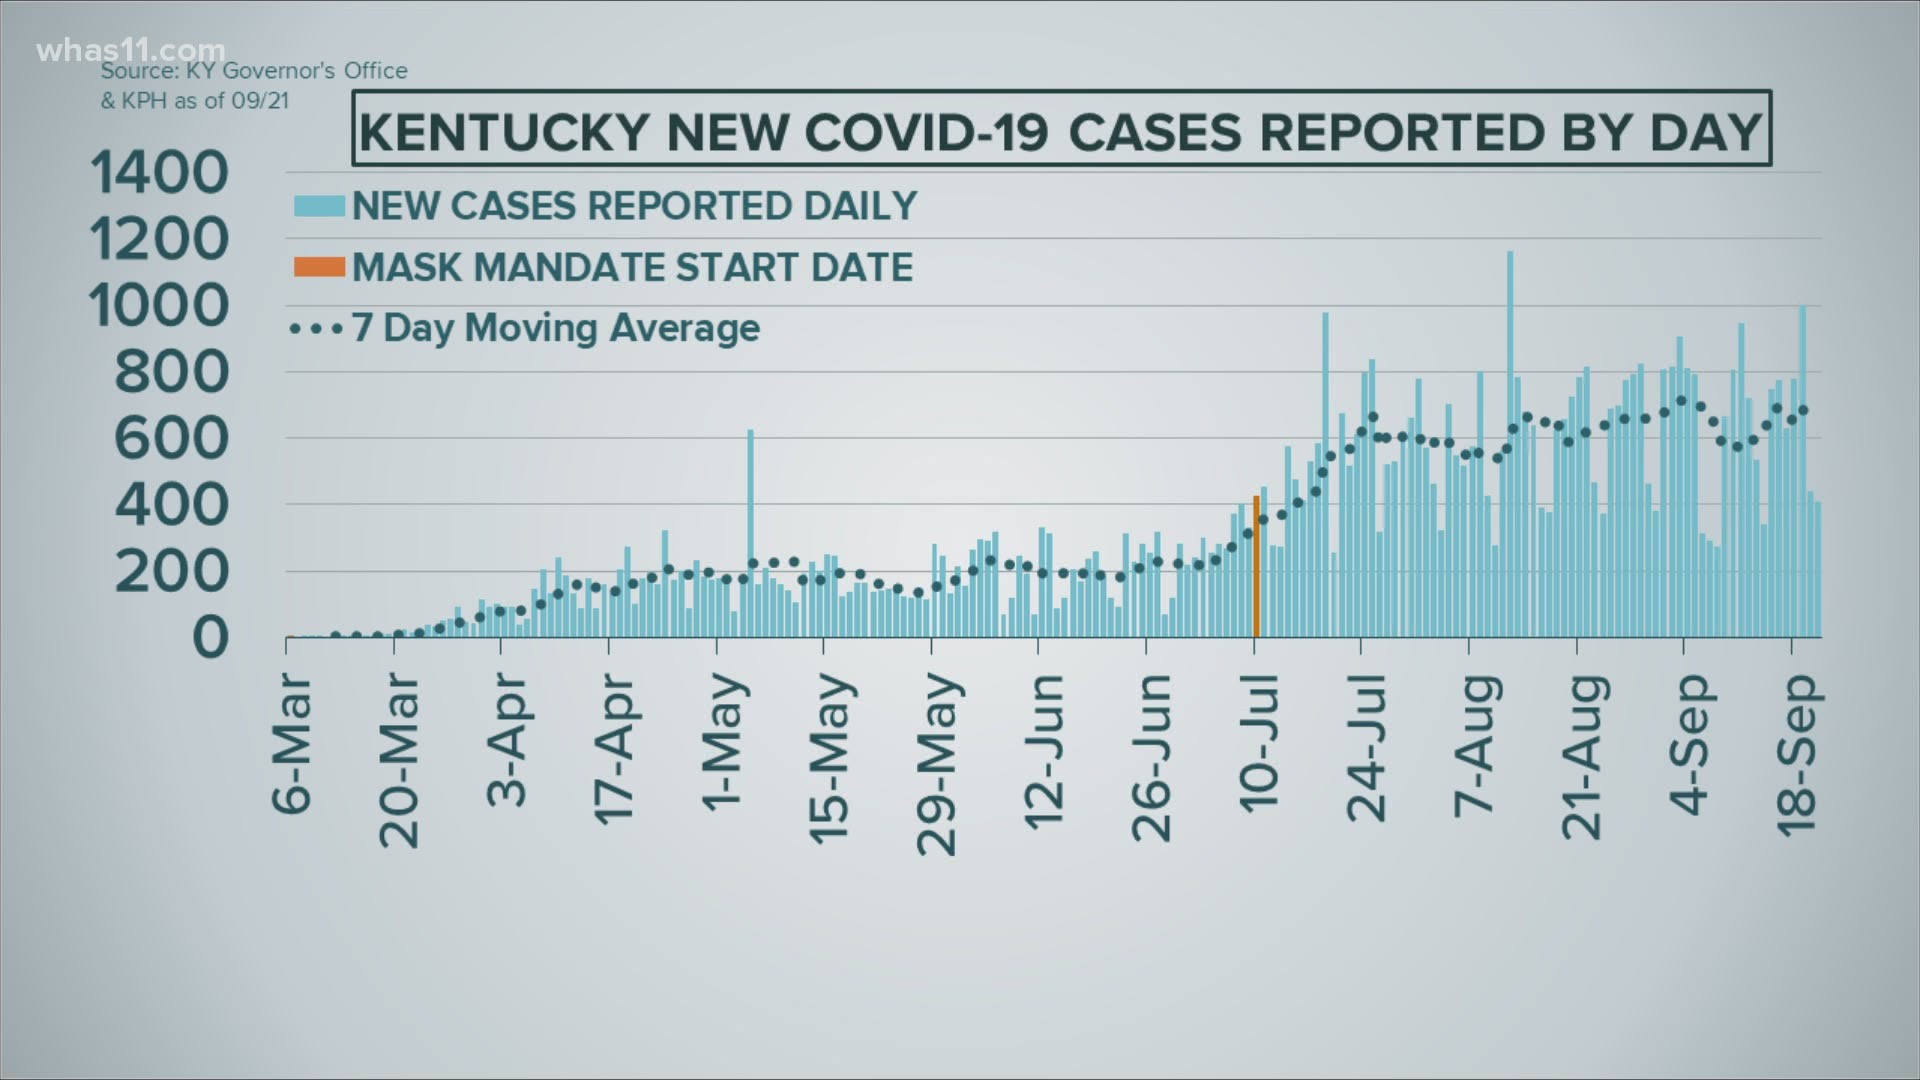 September 19 marked the second highest day on record in Kentucky.